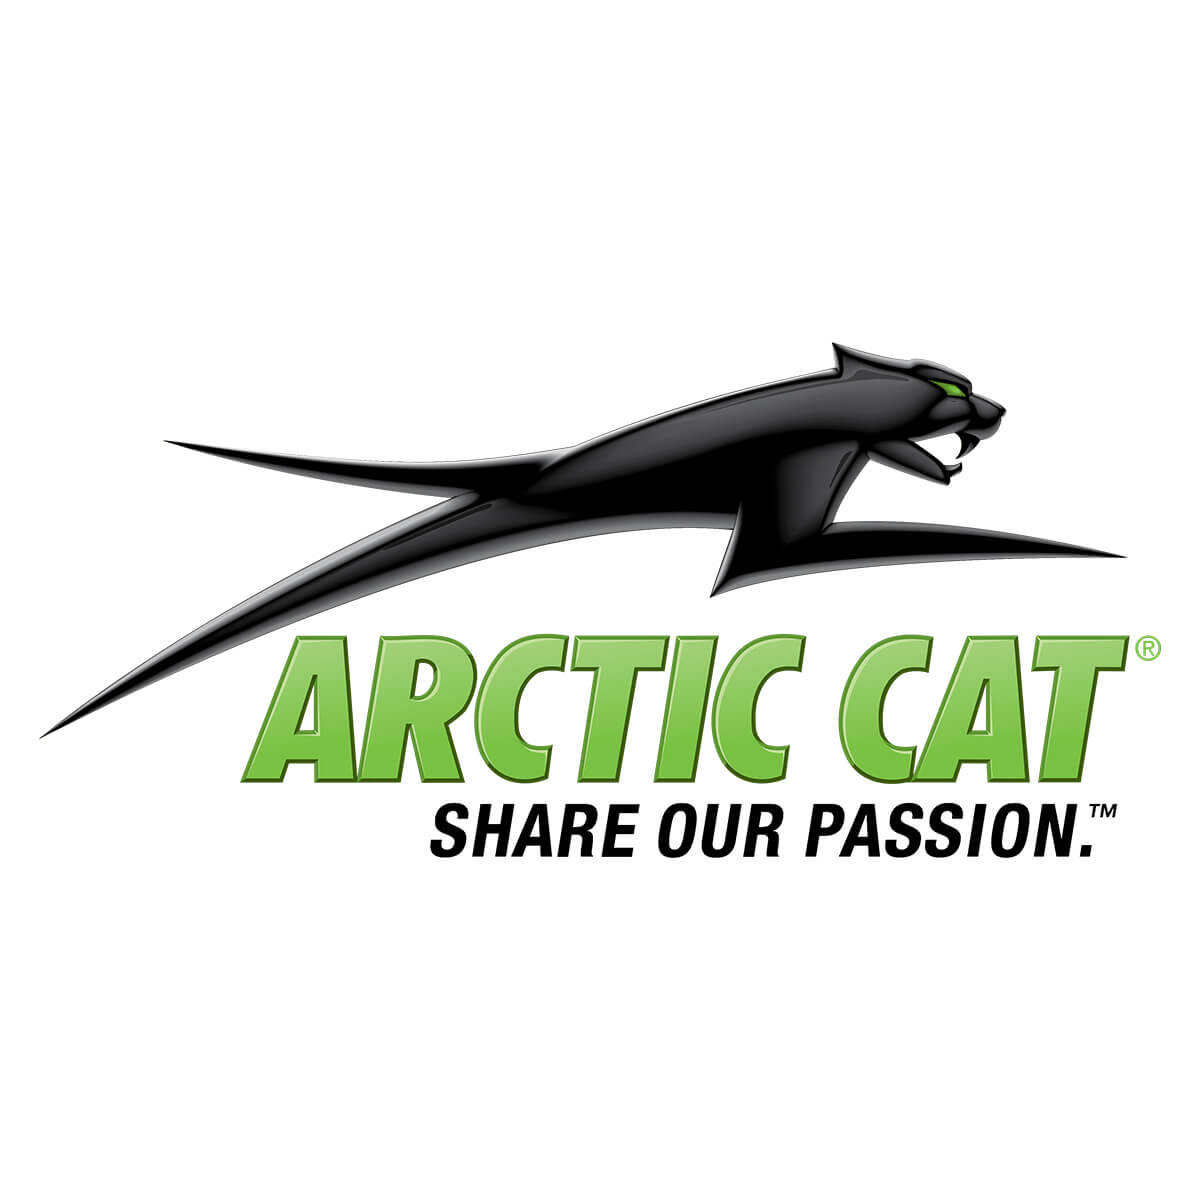 Arctic Cat Share Our Passion logo